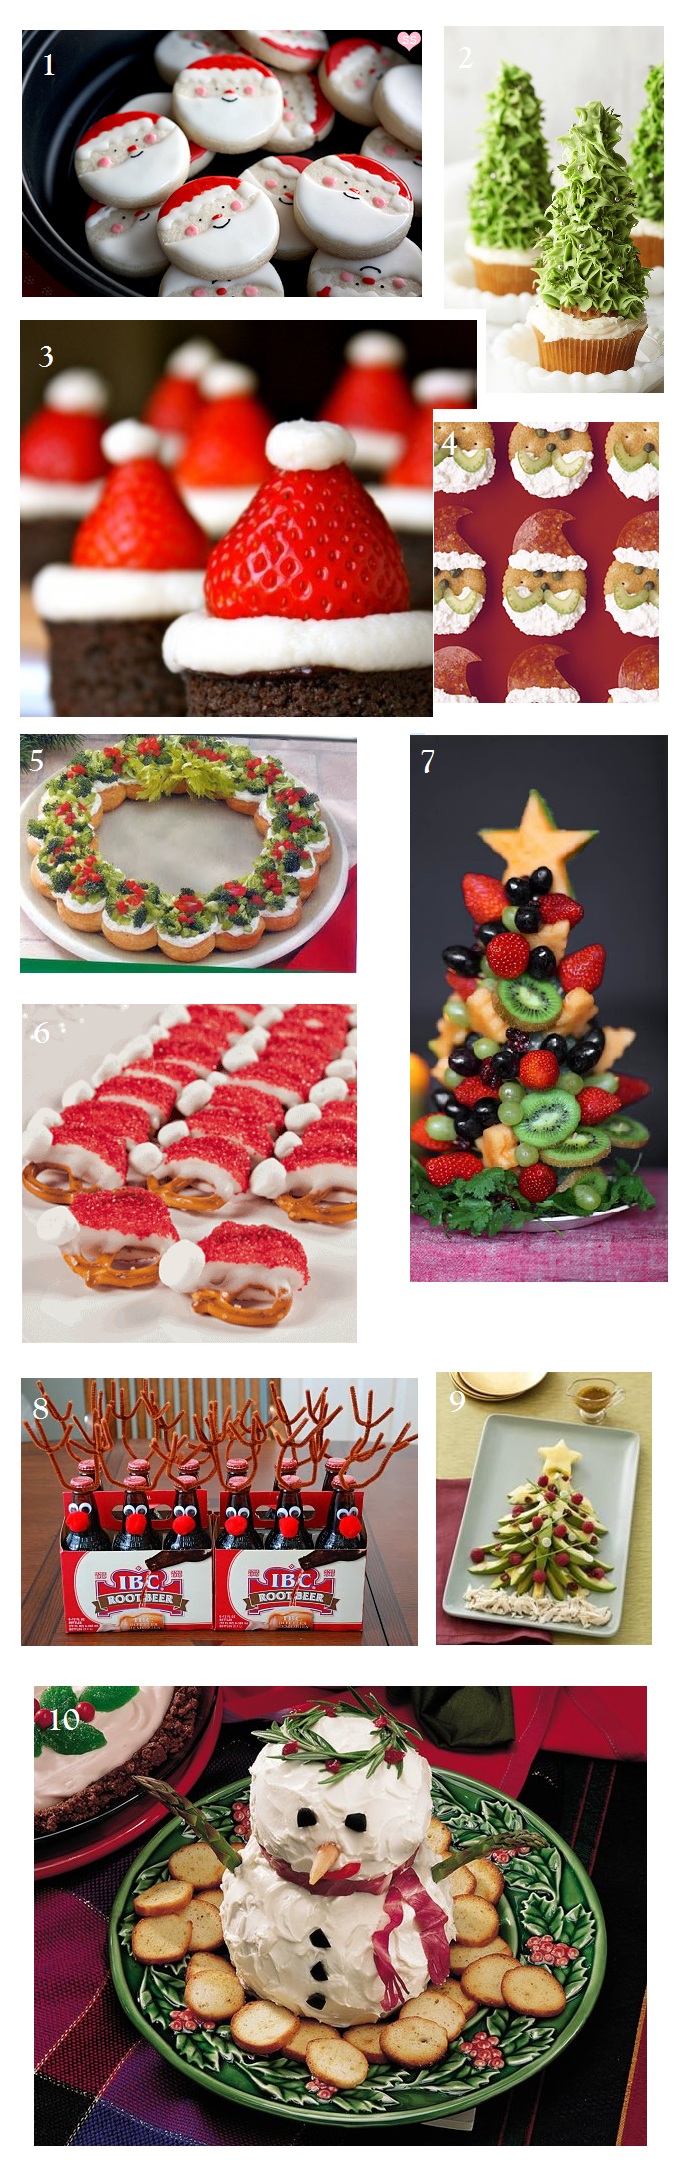 Christmas-party-food-ideas-appetizers-and-desserts